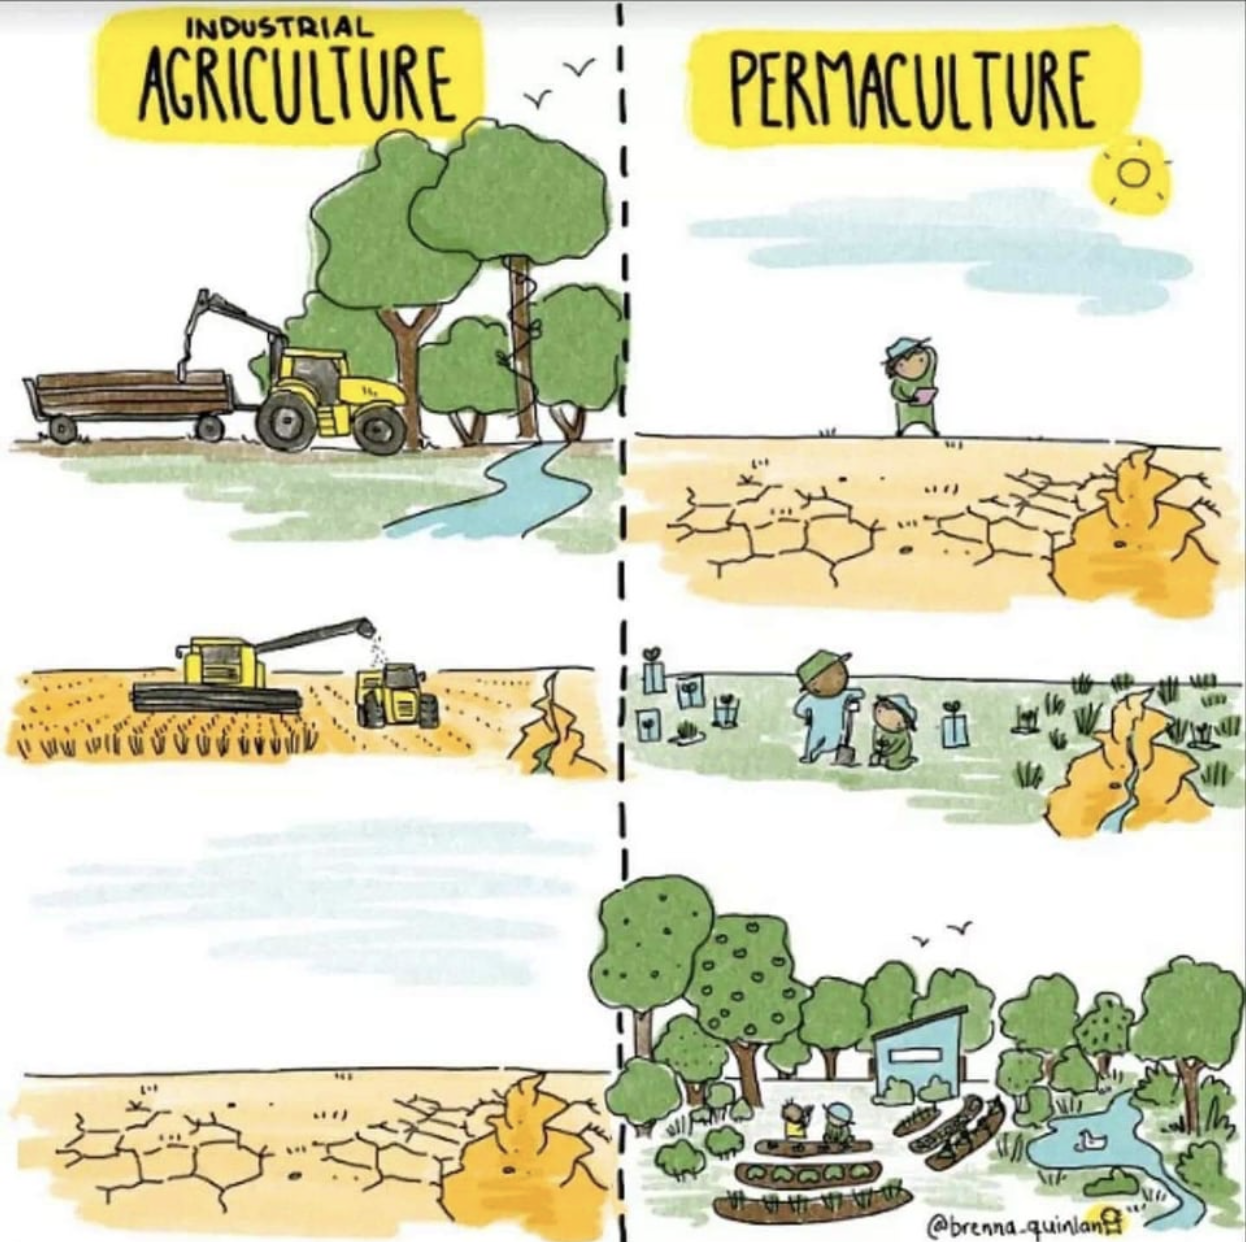 Industrial agriculture vs permaculture. Illustrated by Brenna Quinlan